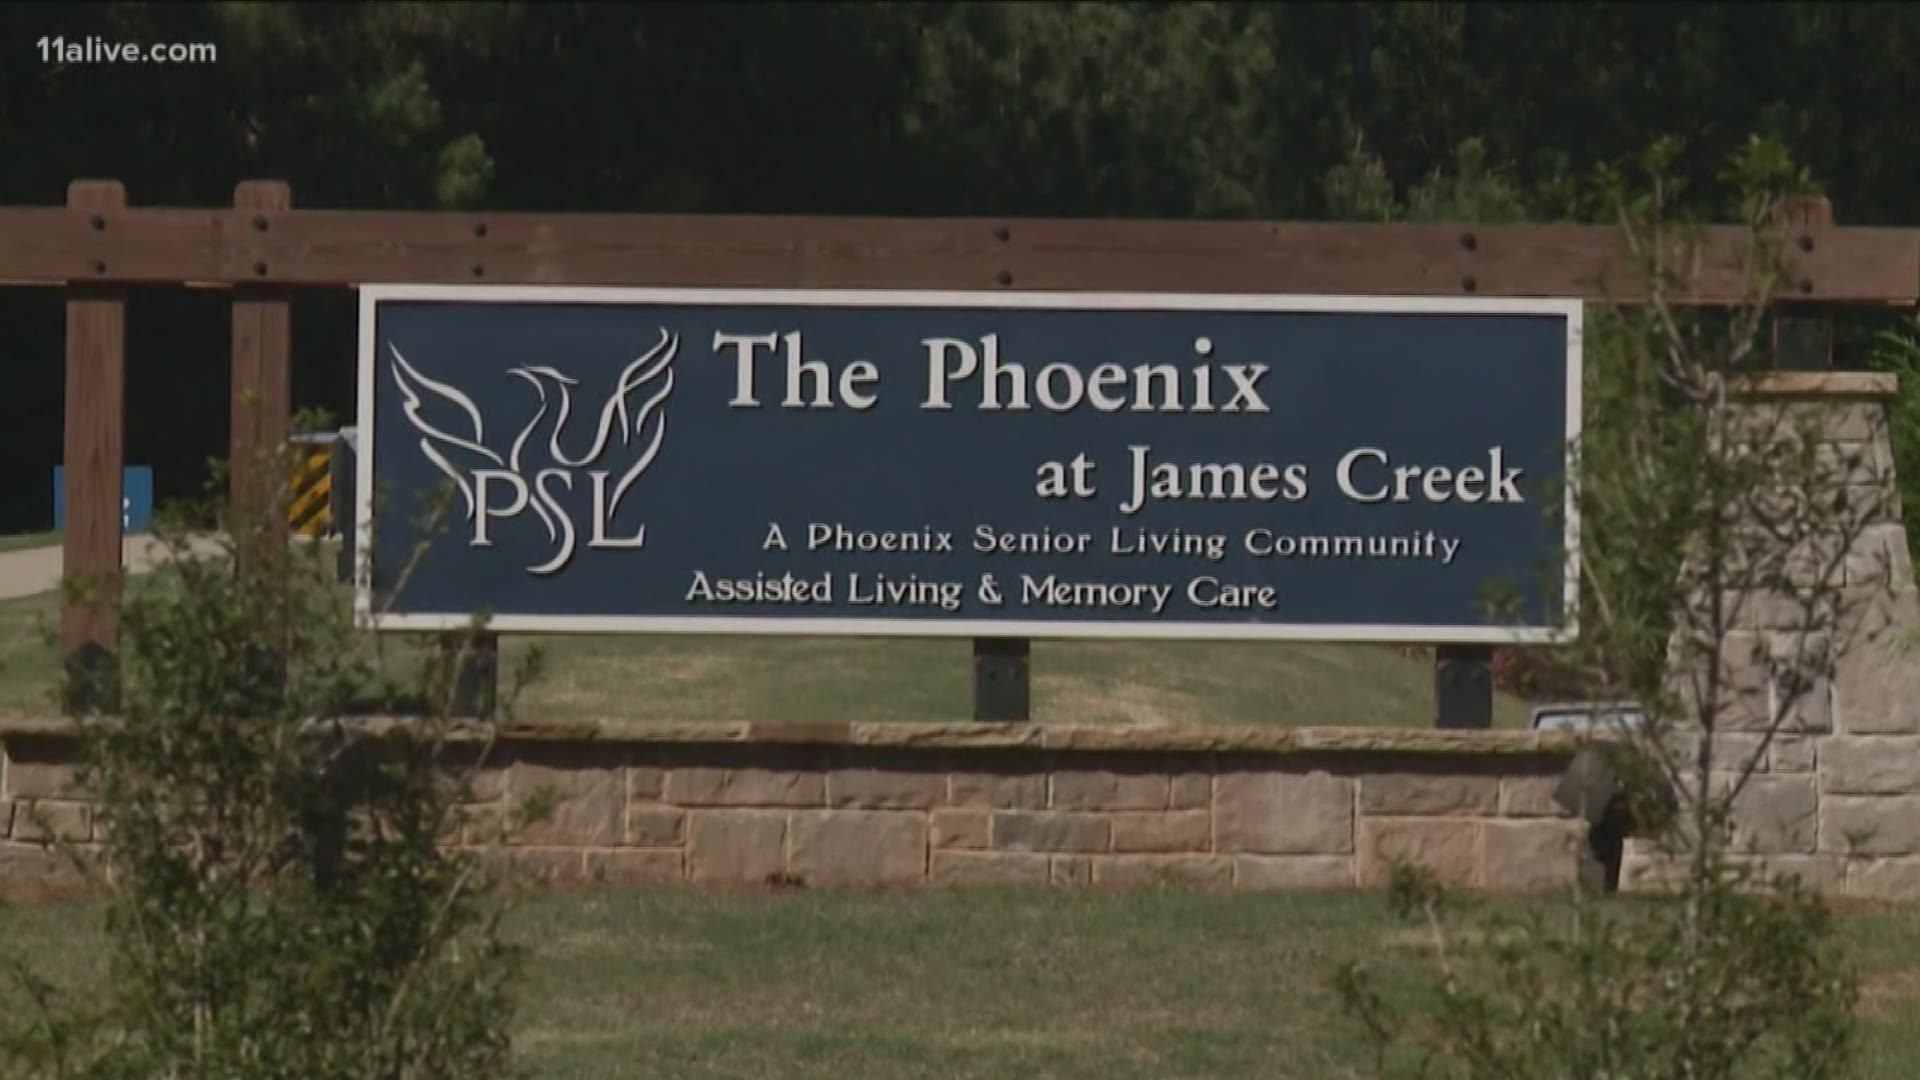 Management at Phoenix Senior Living told 11Alive the company is helping packed hospitals